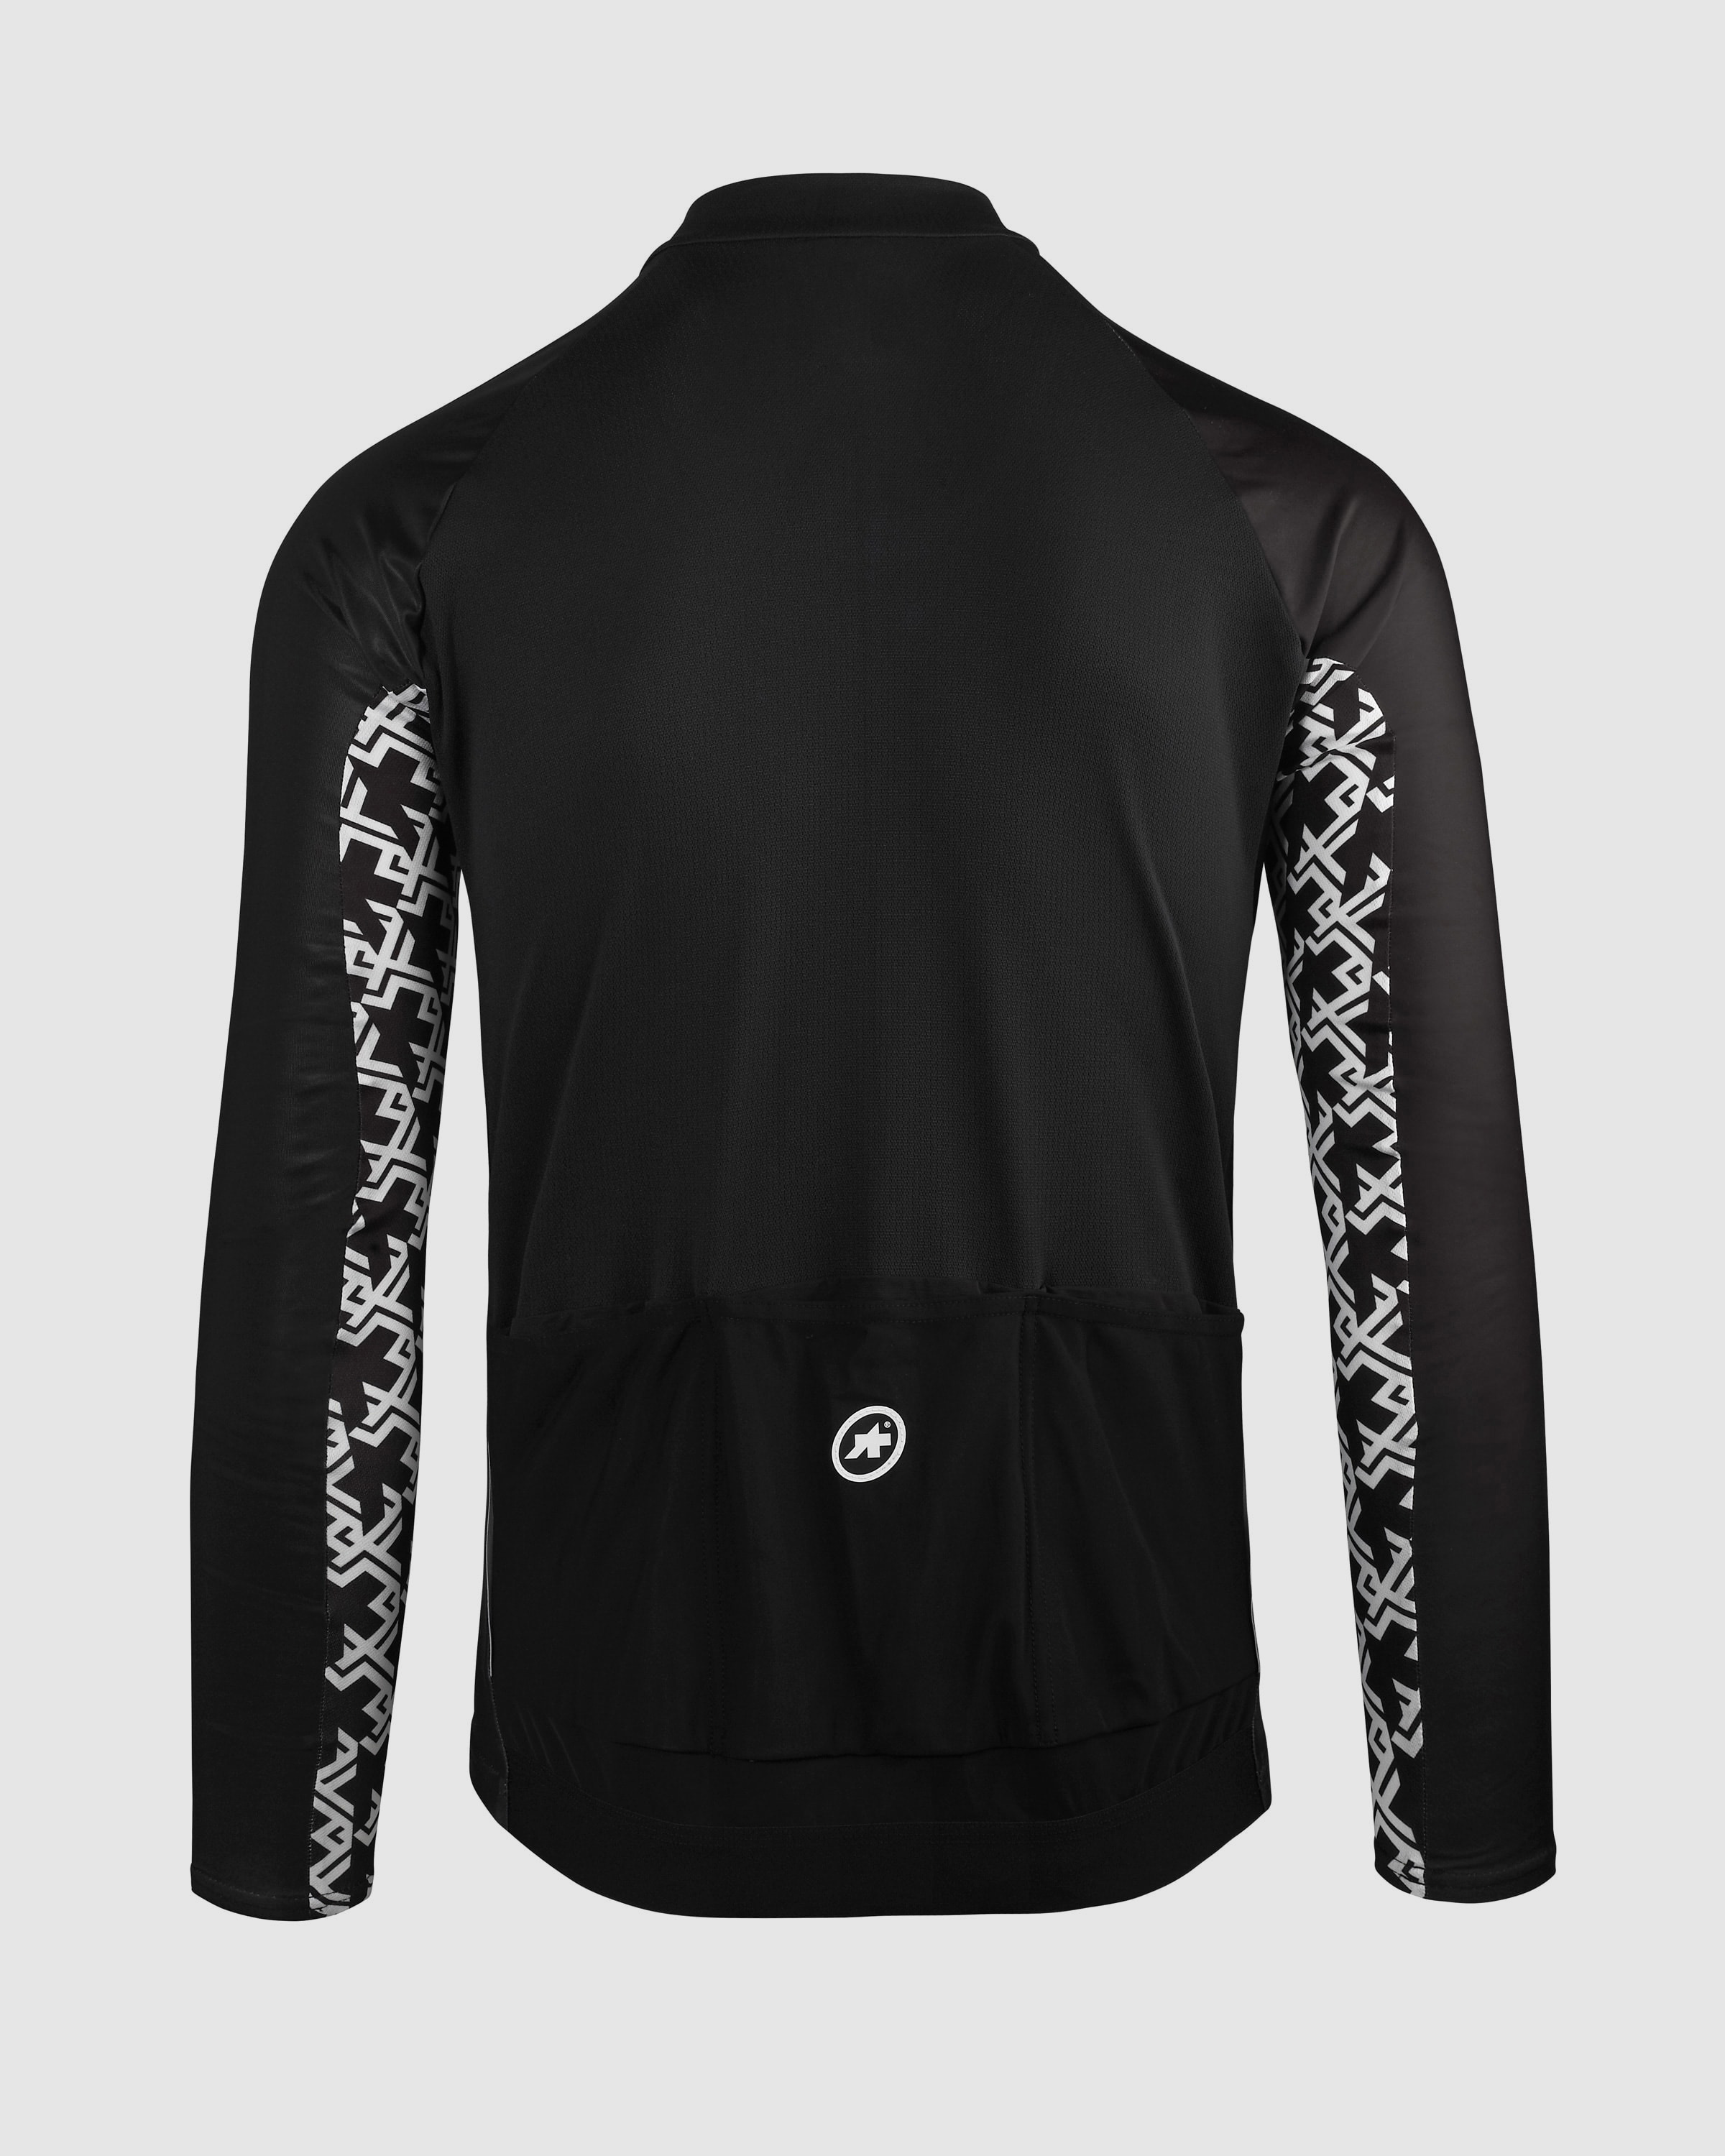 MILLE GT Spring Fall LS Jersey - ASSOS Of Switzerland - Official Outlet